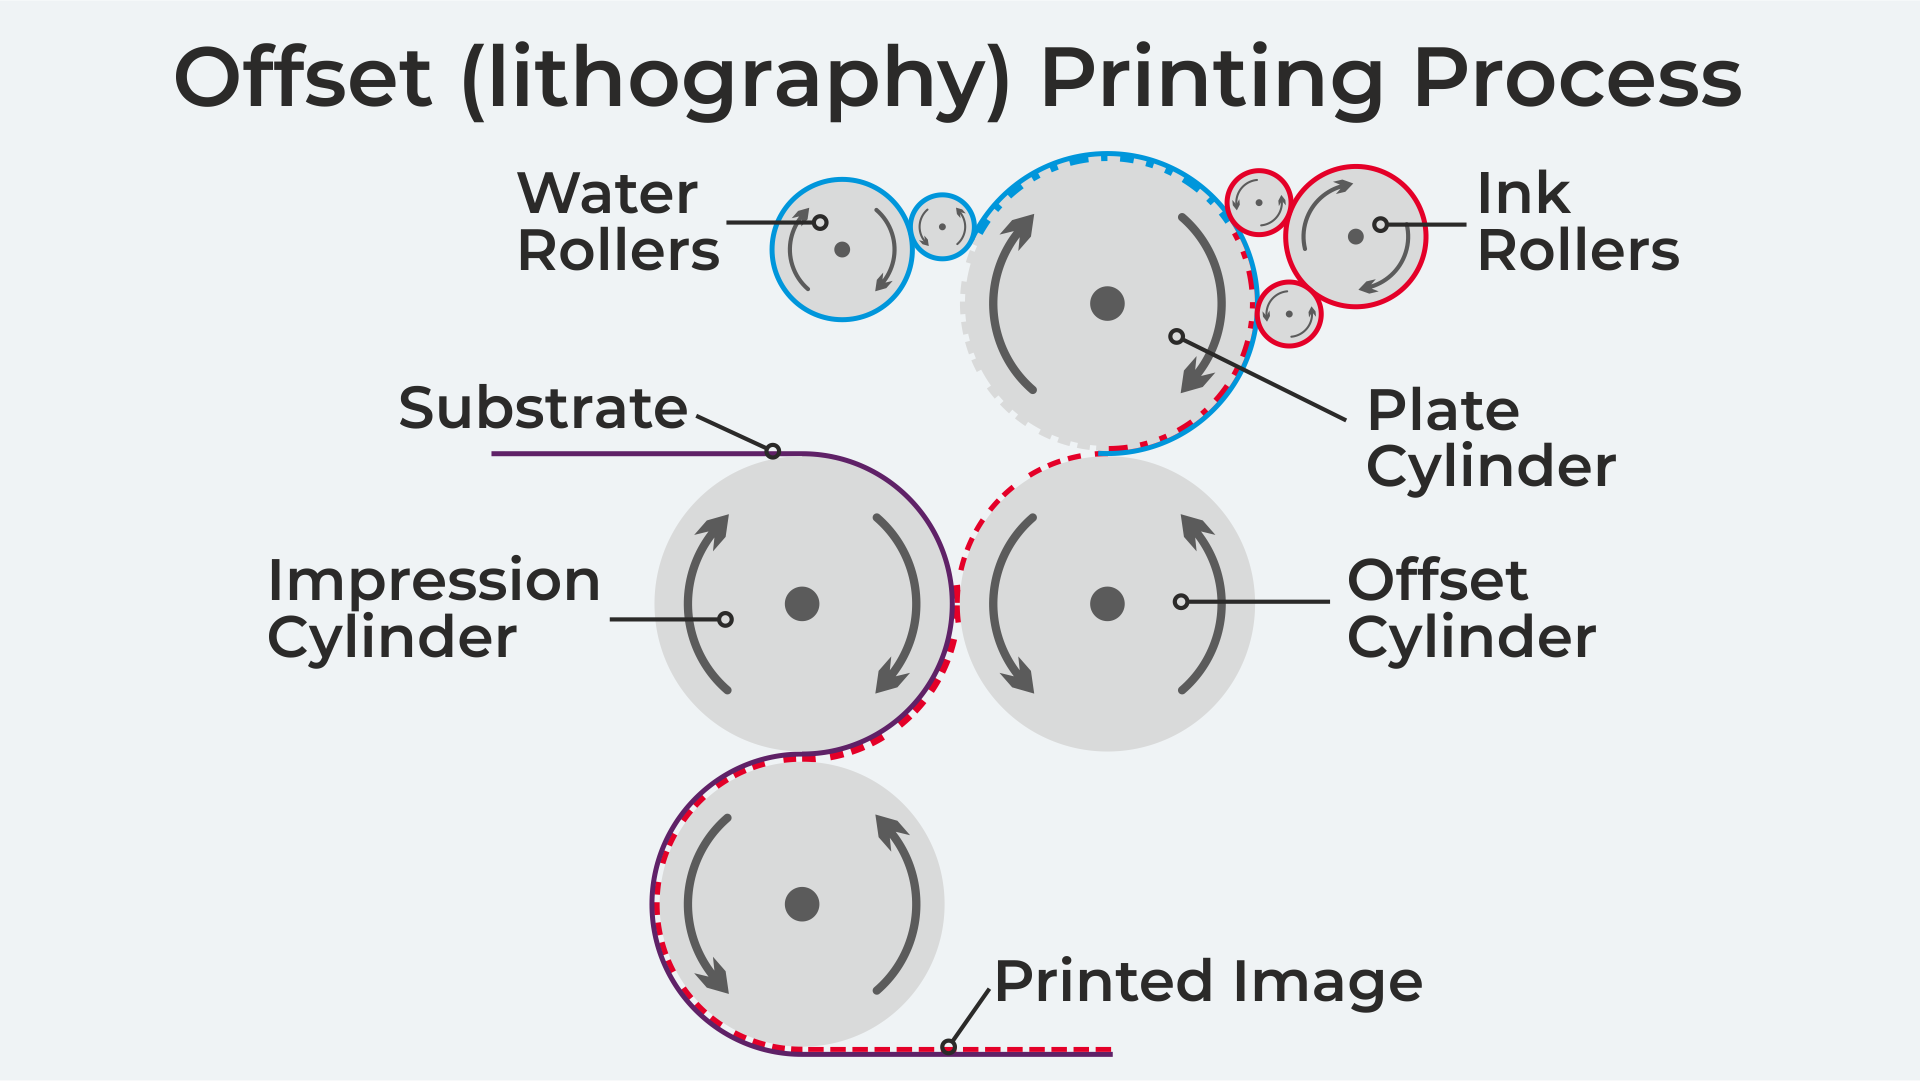 Offset (Lithographic) printing process diagram